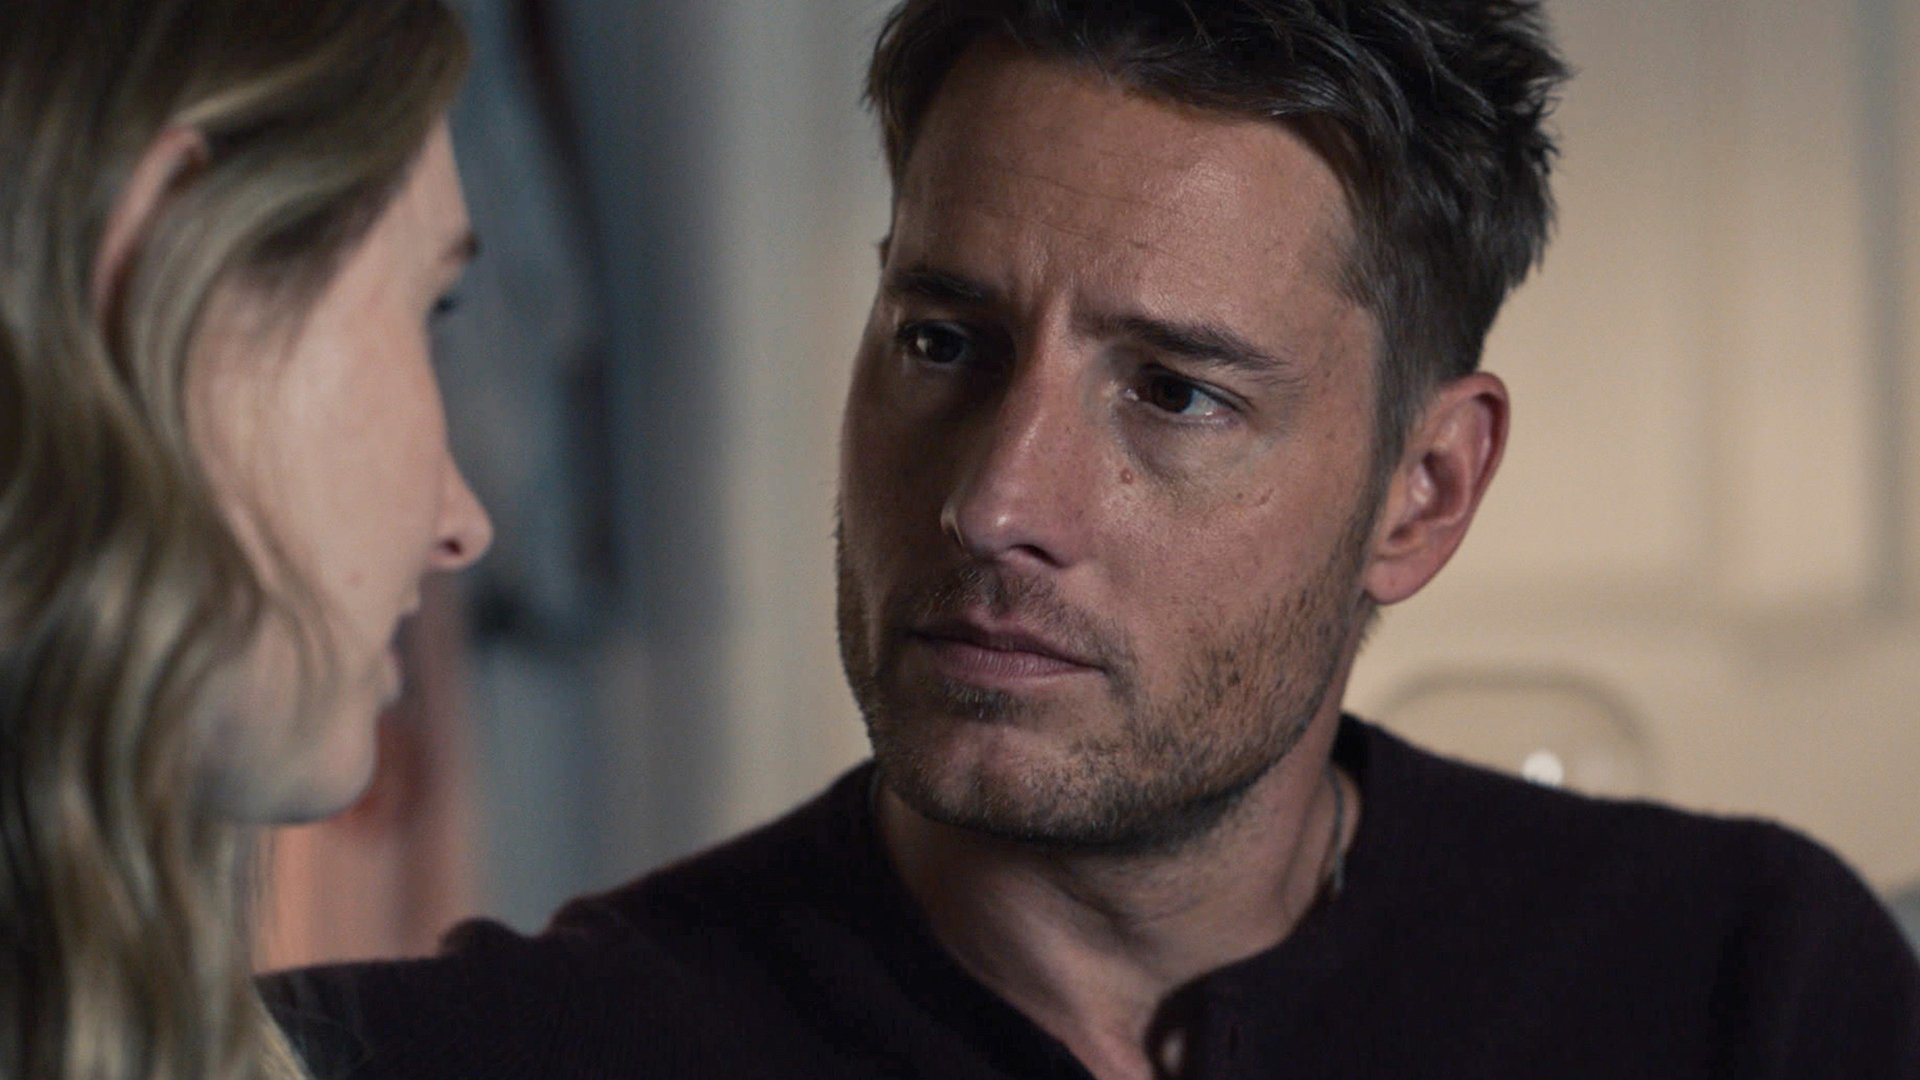 Justin Hartley as Kevin looks at Caitlin Thompson as Madison in ‘This Is Us Season 5 Episode 12